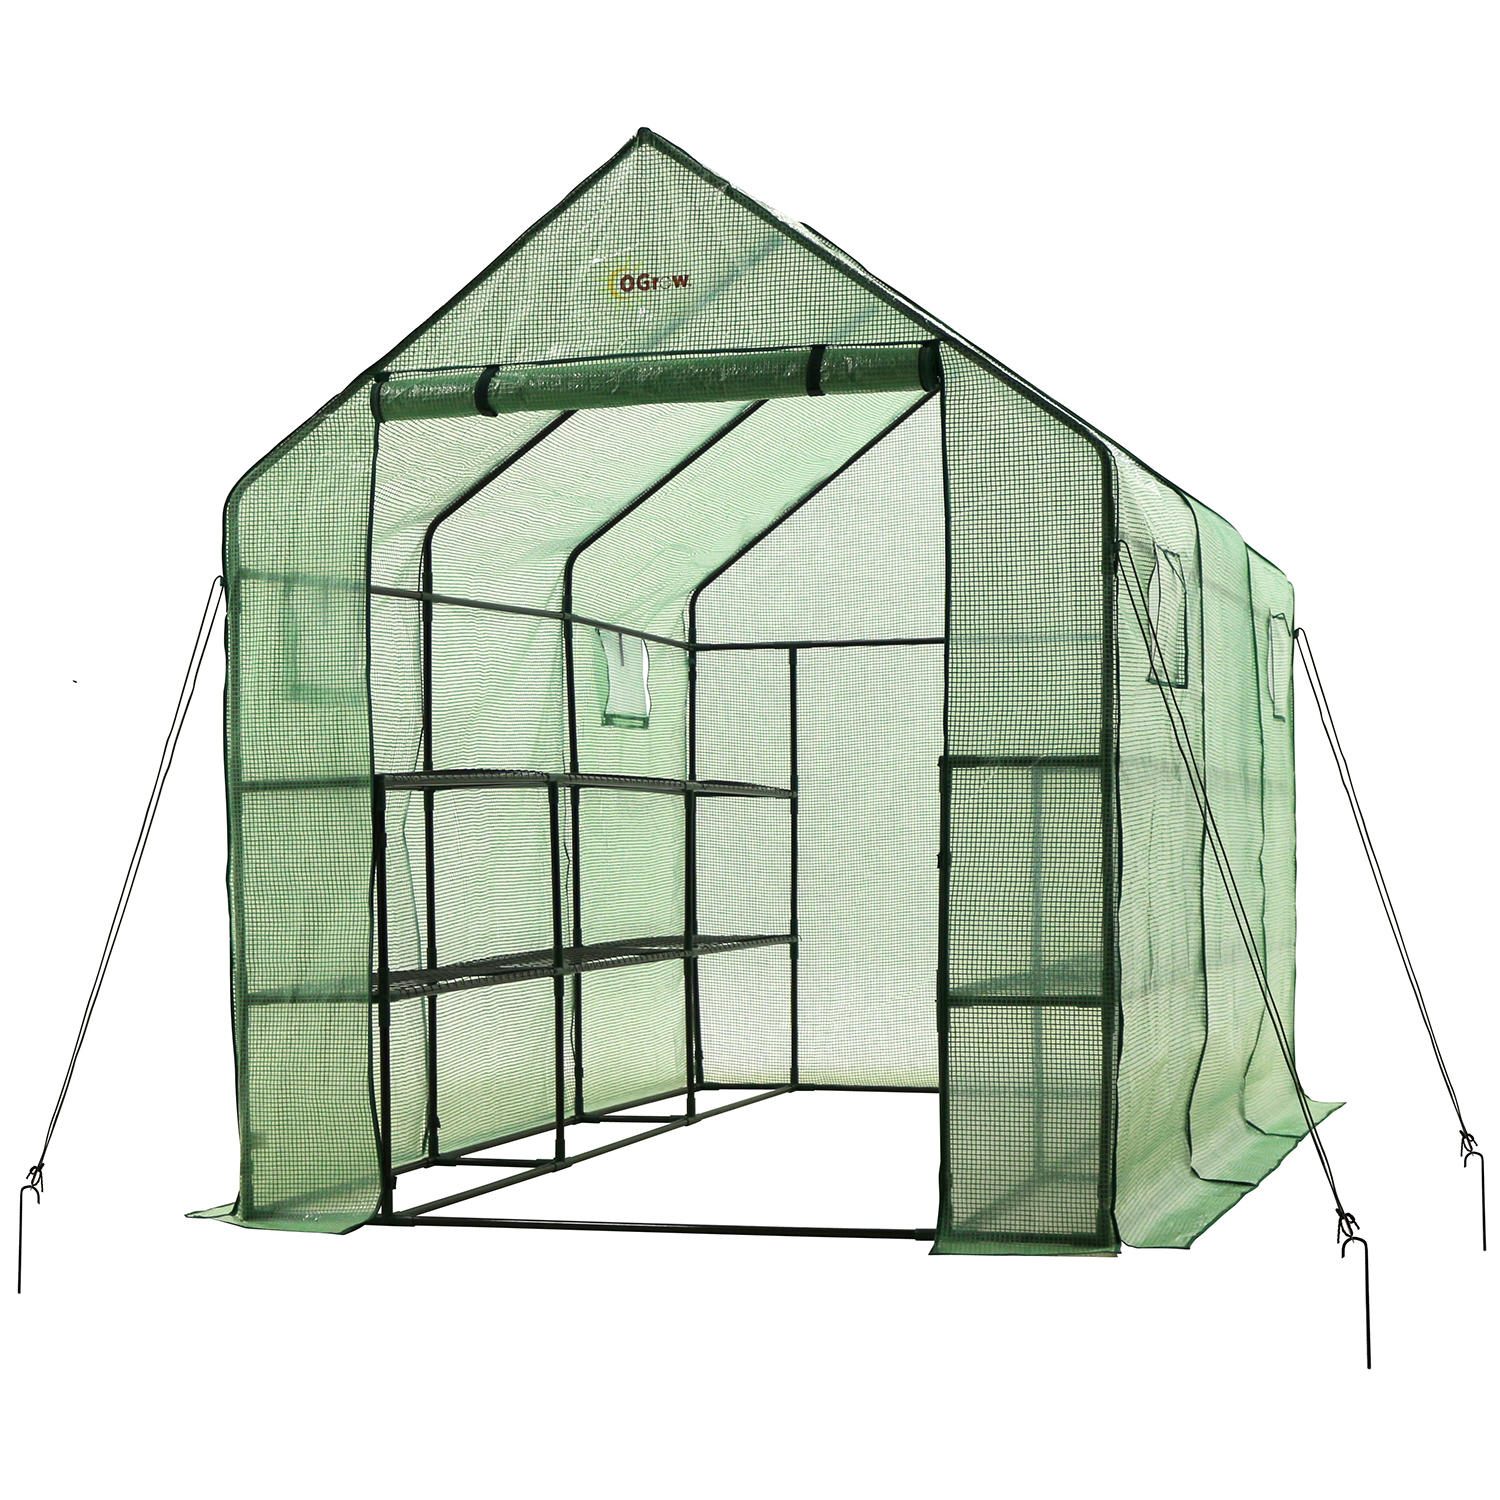 Ogrow Very Spacious And Sturdy Walk-in 2 Tier 12 Shelf Portable Garden Greenhouse with windows